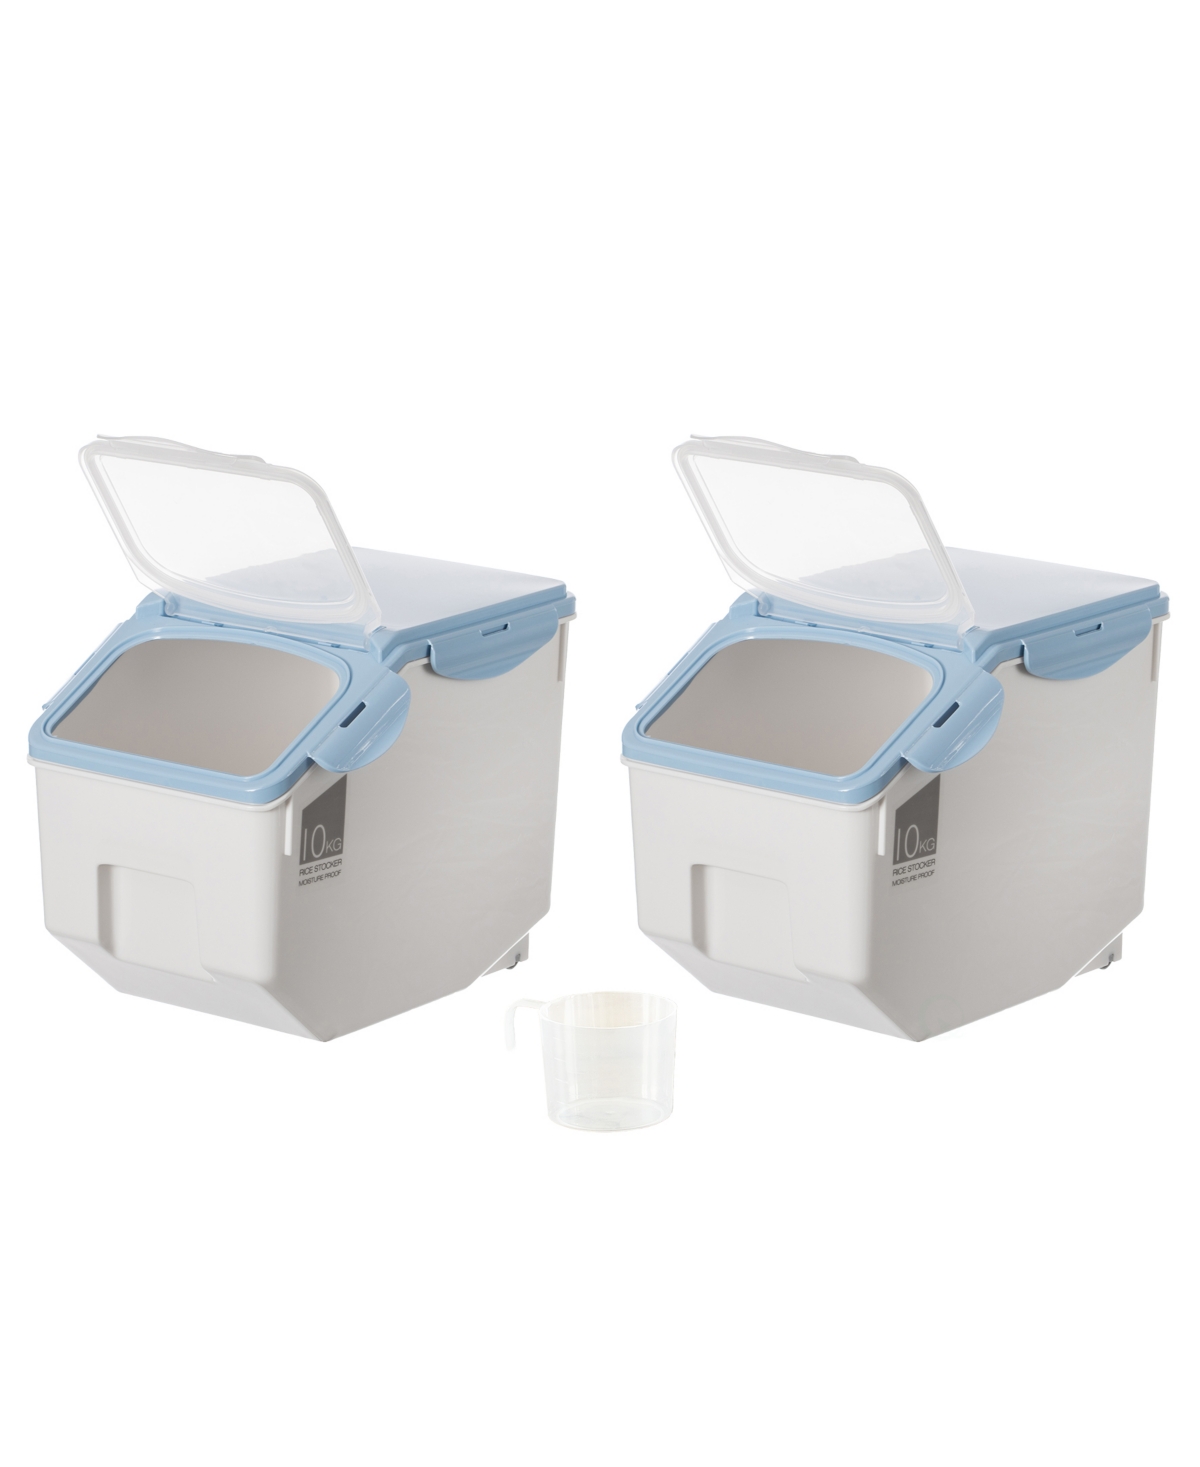 Basicwise Medium Plastic Storage Food Holder Containers With A Measuring Cup And Wheels, Set Of 3 In White